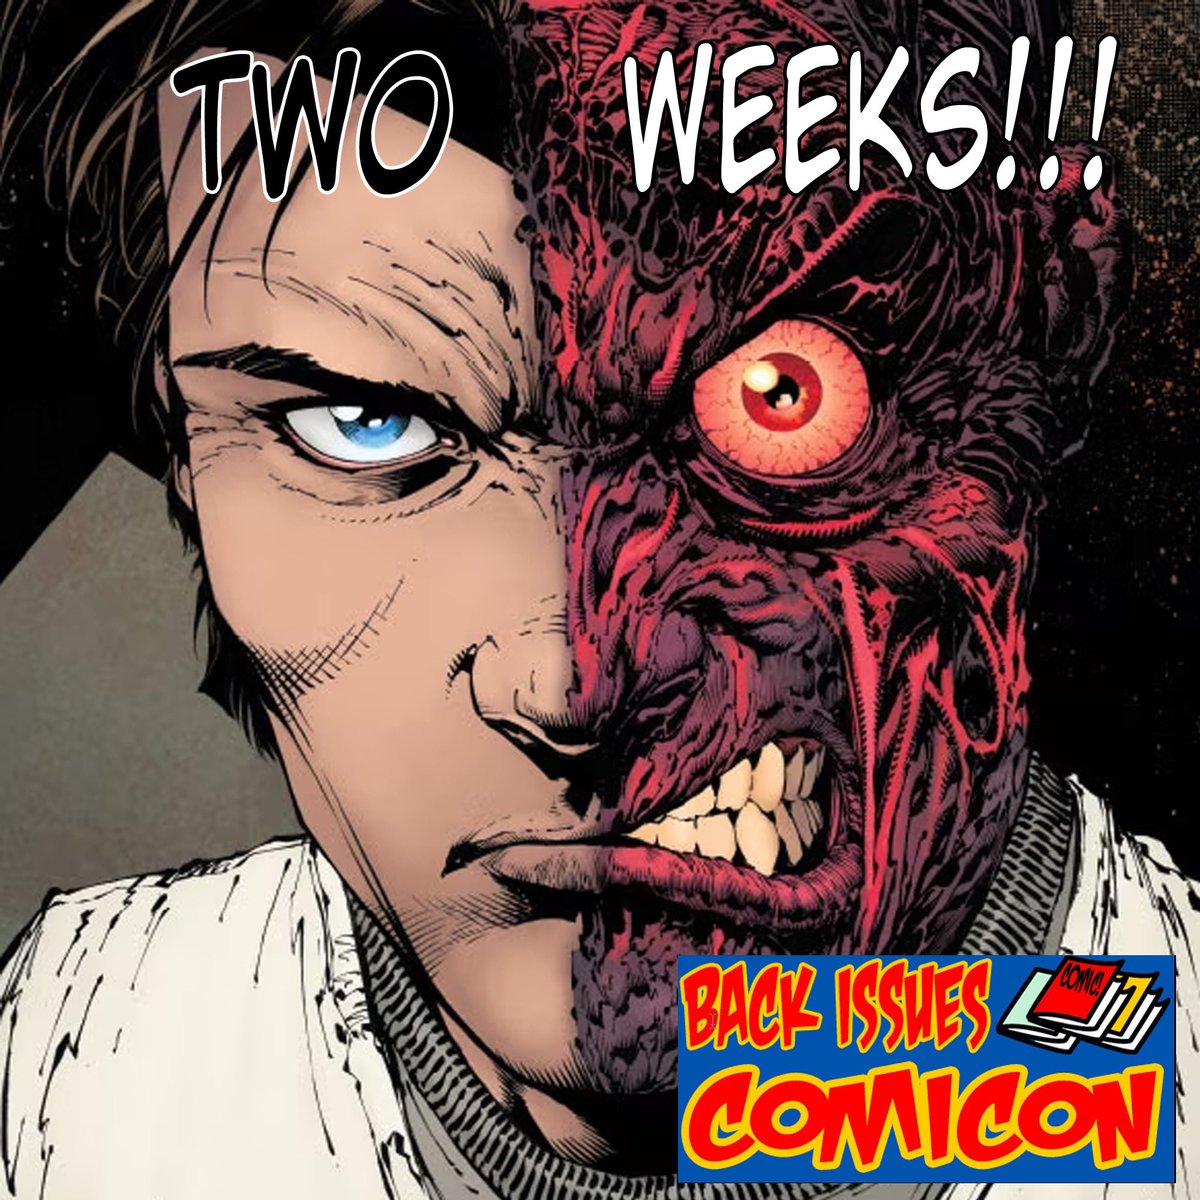 Back Issues Comicon is just 2 weeks away! Held in the Christ Church Parish Hall, at 61 Dundas Street in Dartmouth, Back Issues Comicon is a comic focused show dedicated to buying, selling & trading comics! We have over 30 tables of vendors plus a few special comic creator guests!